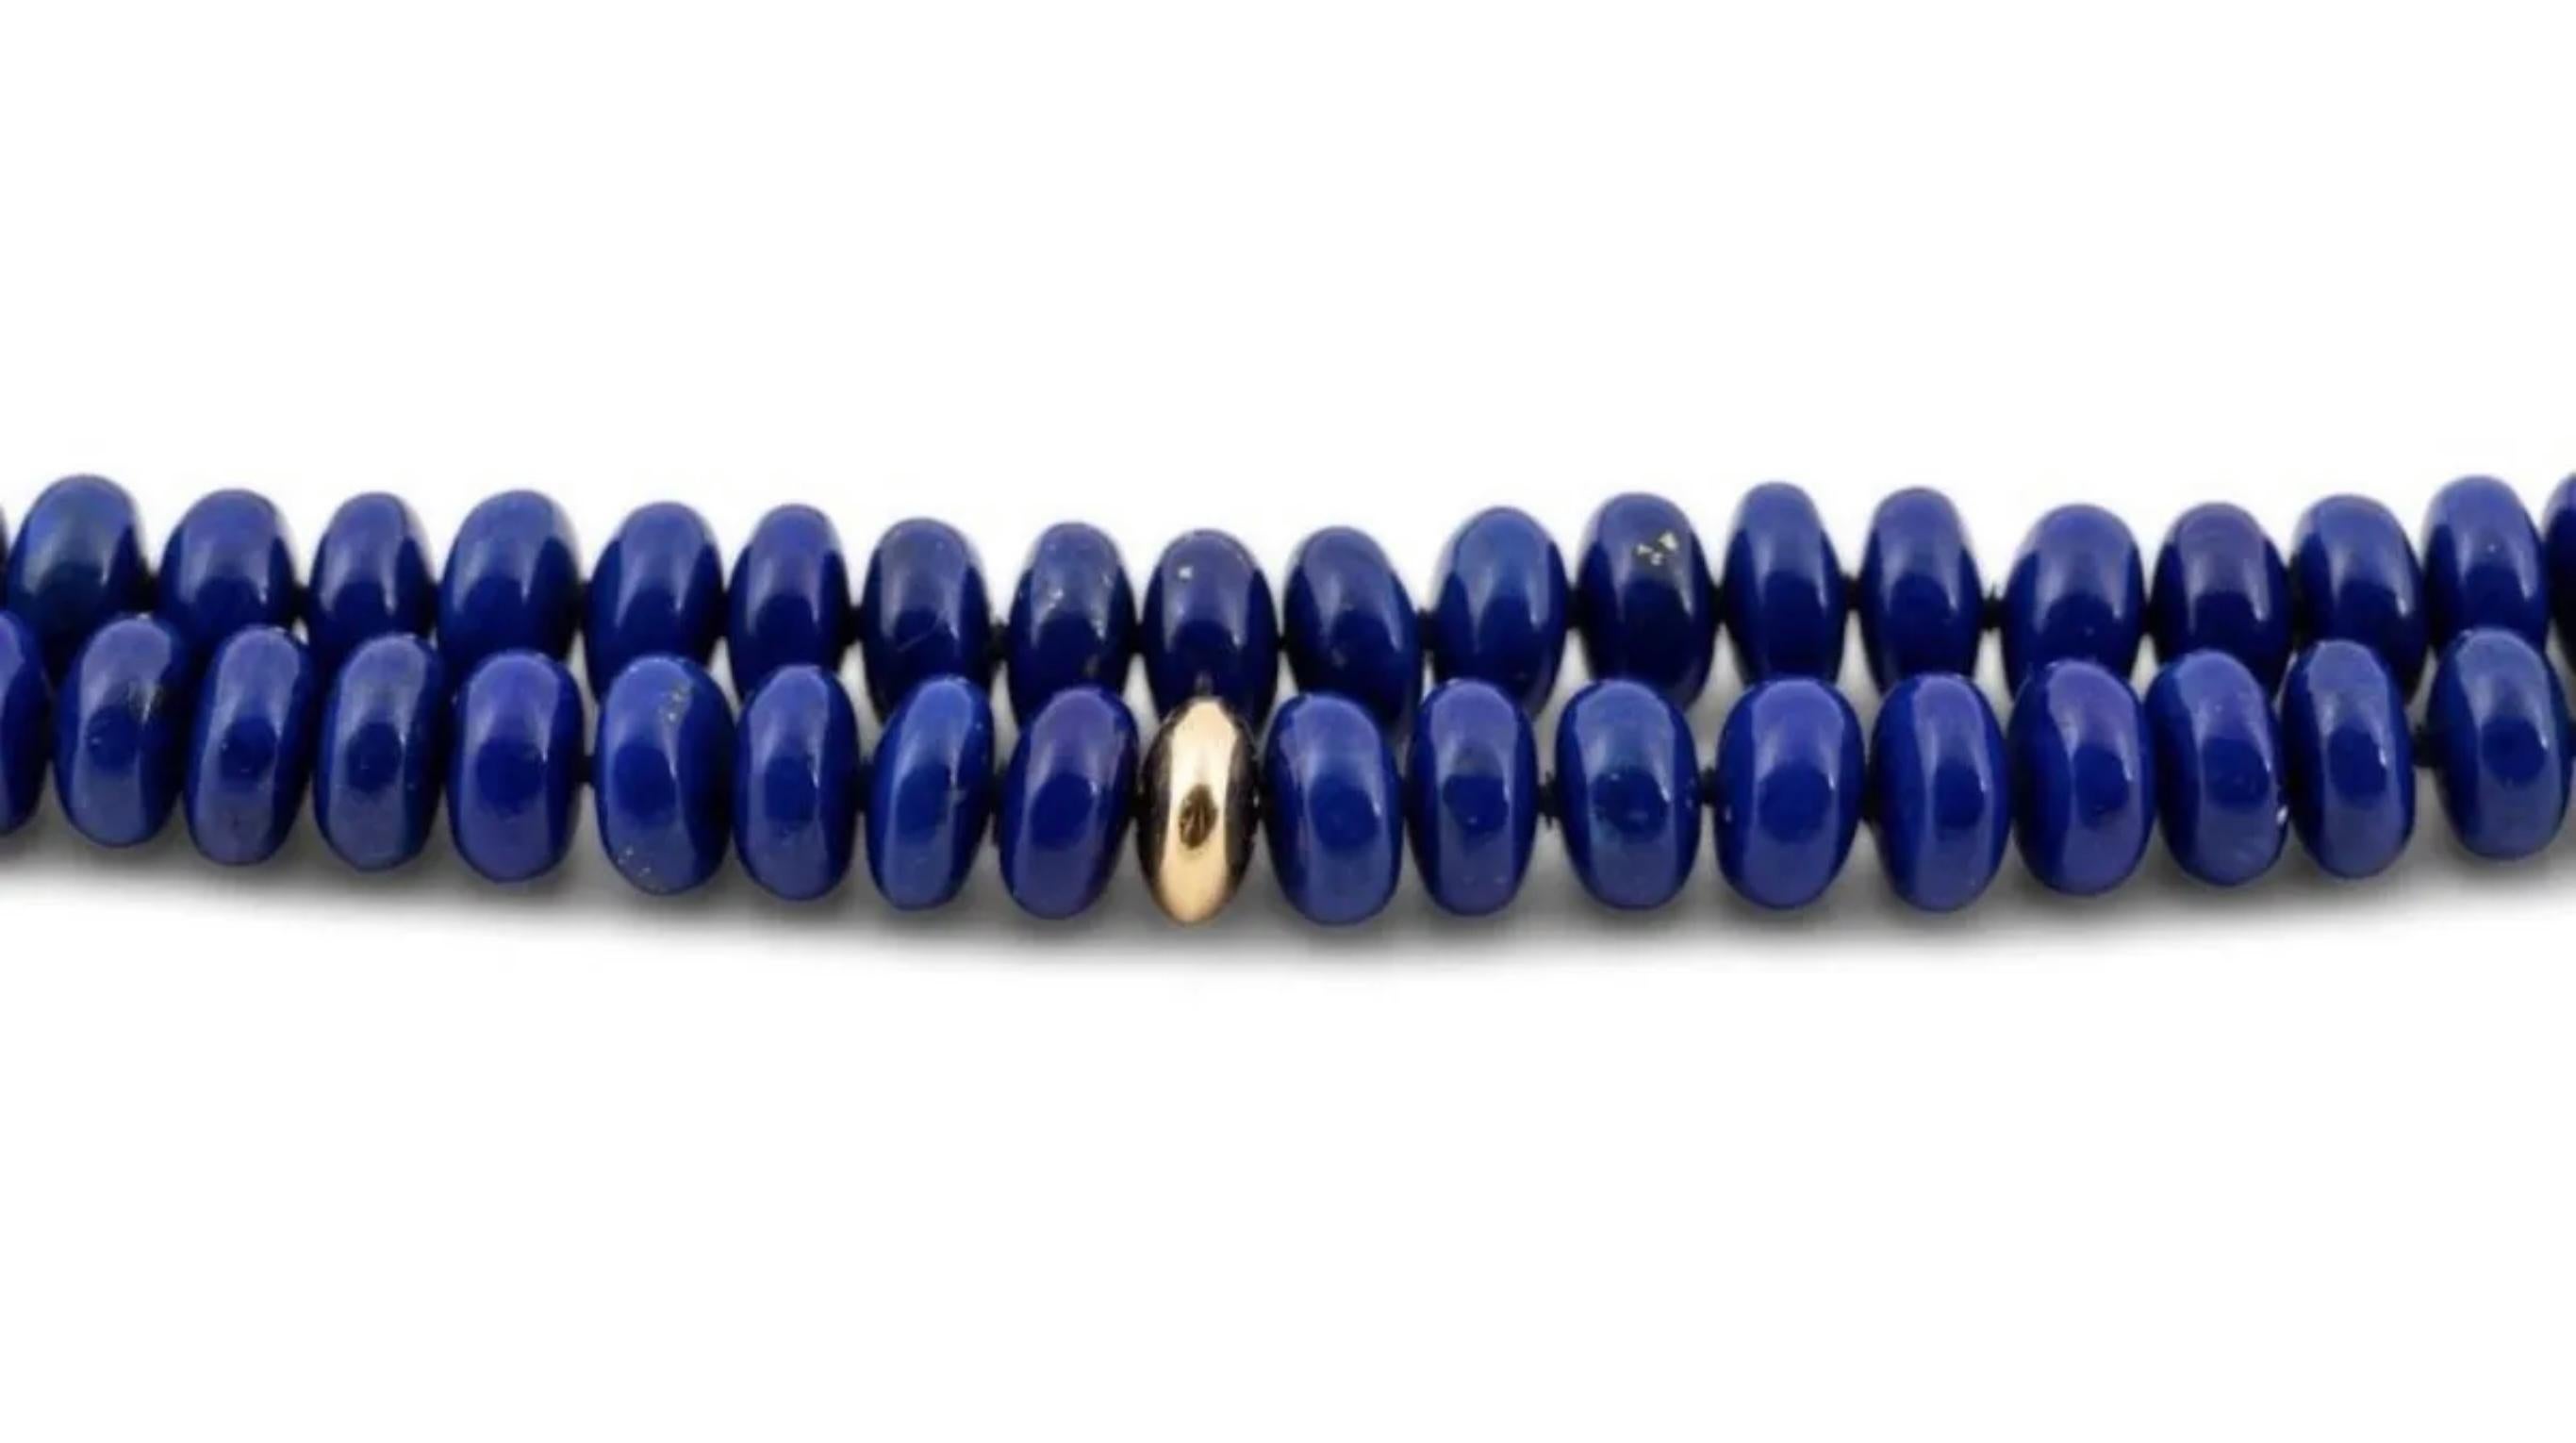 Valentin Magro double strand lapis lazuli and 18k bead 36” necklace featuring 8.1mm to 8.3mm rondelle beads in dark blue lapis strung with (10) gold rondelle shaped beads with an 18k gold decorative claspwith makers mark and marked 18k. Excellent